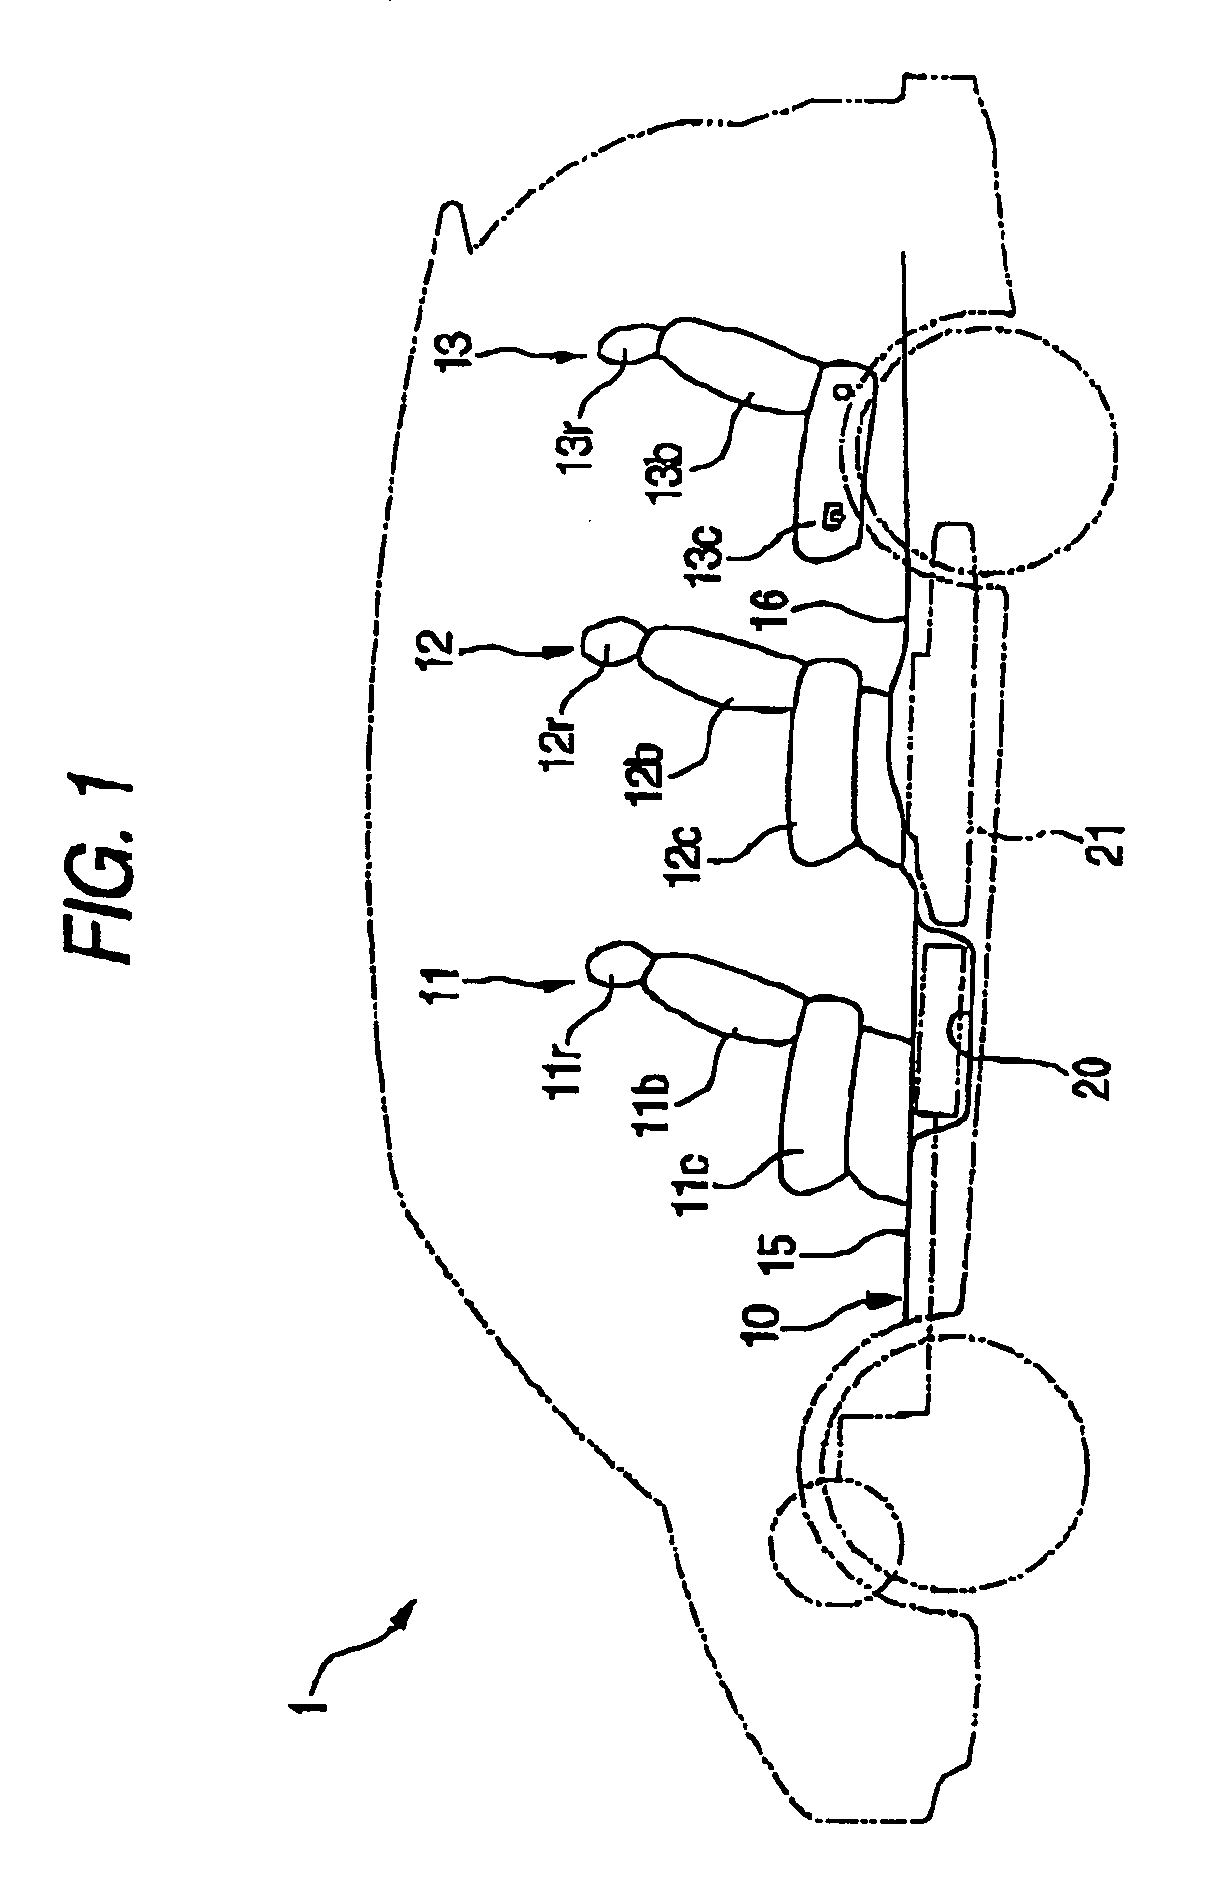 Structure for installing high-voltage equipment component to vehicle